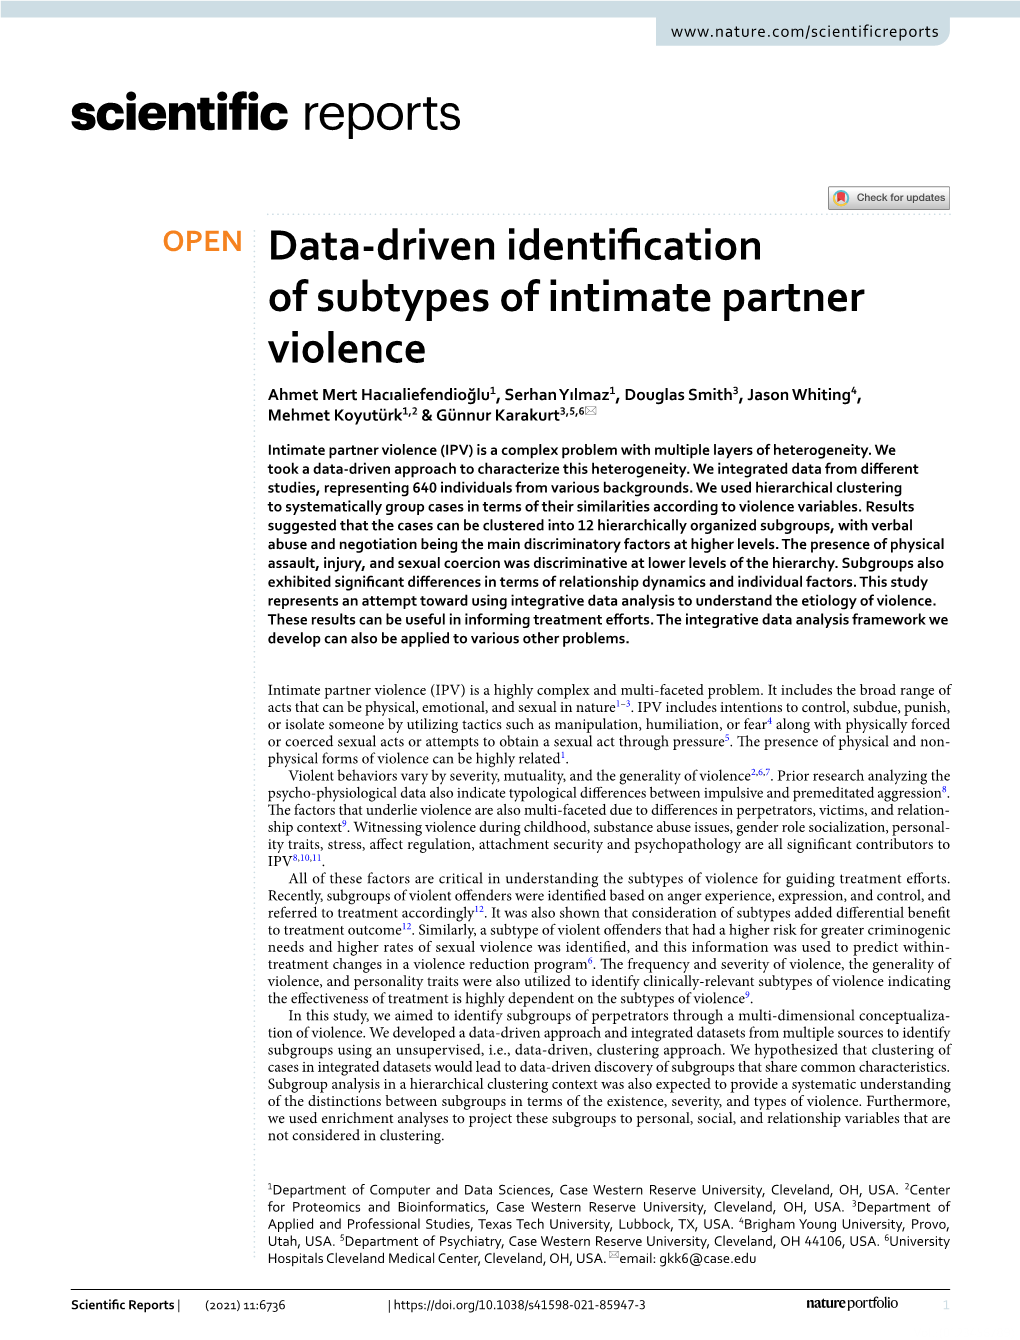 Data-Driven Identification of Subtypes of Intimate Partner Violence